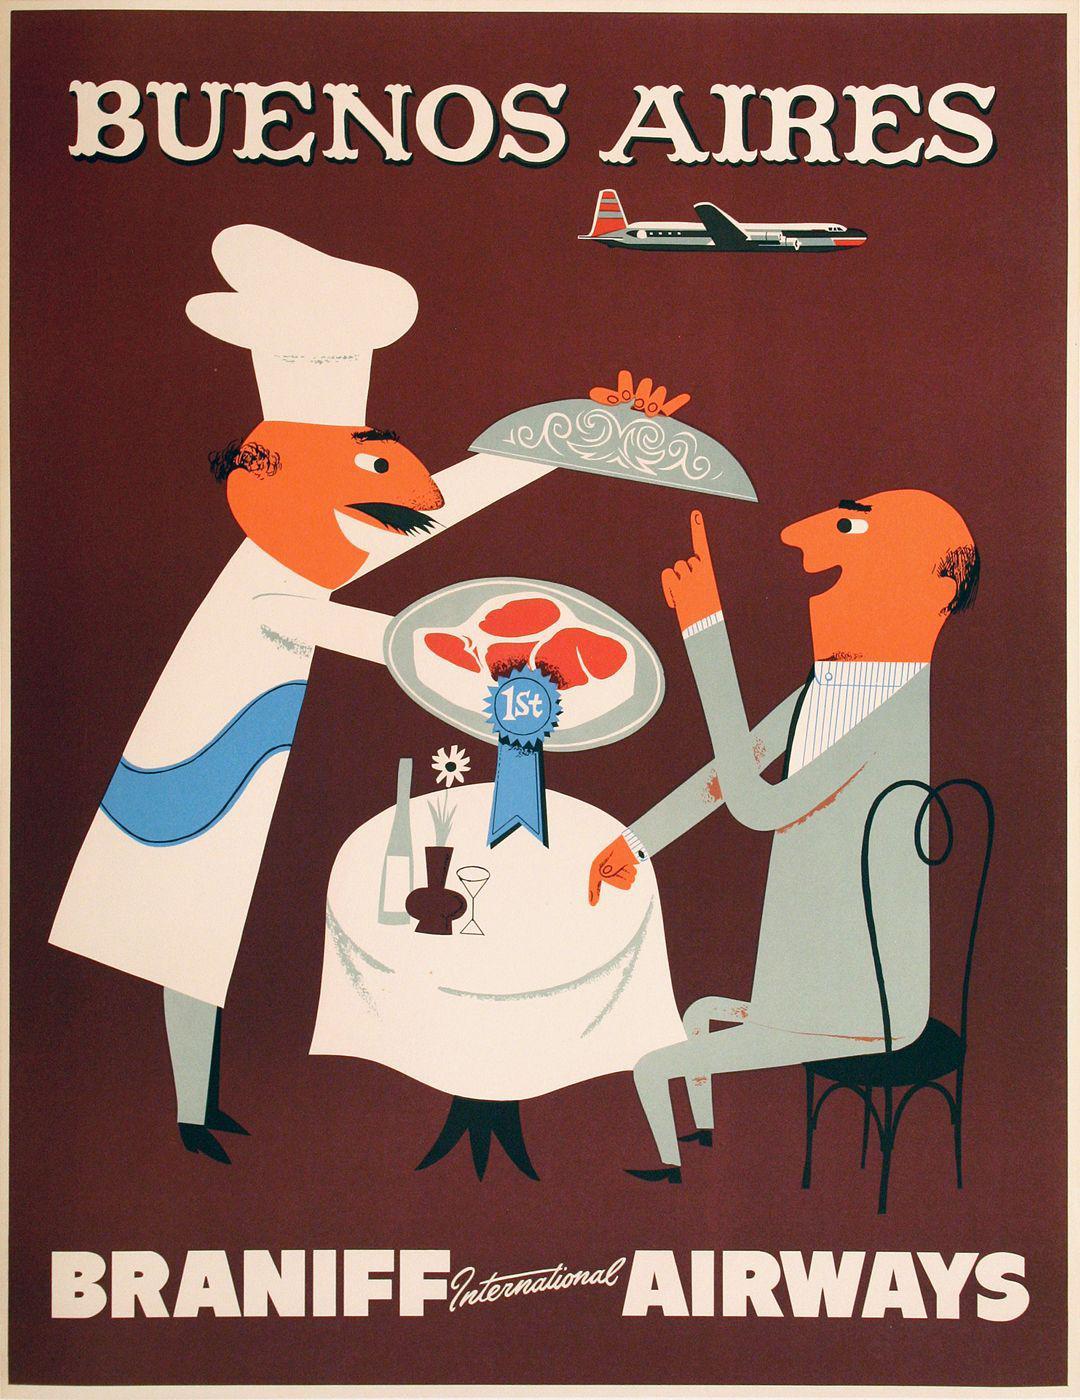 Braniff Airways Buenos Aires Original Travel Poster c1955 - Chef and Diner at Table